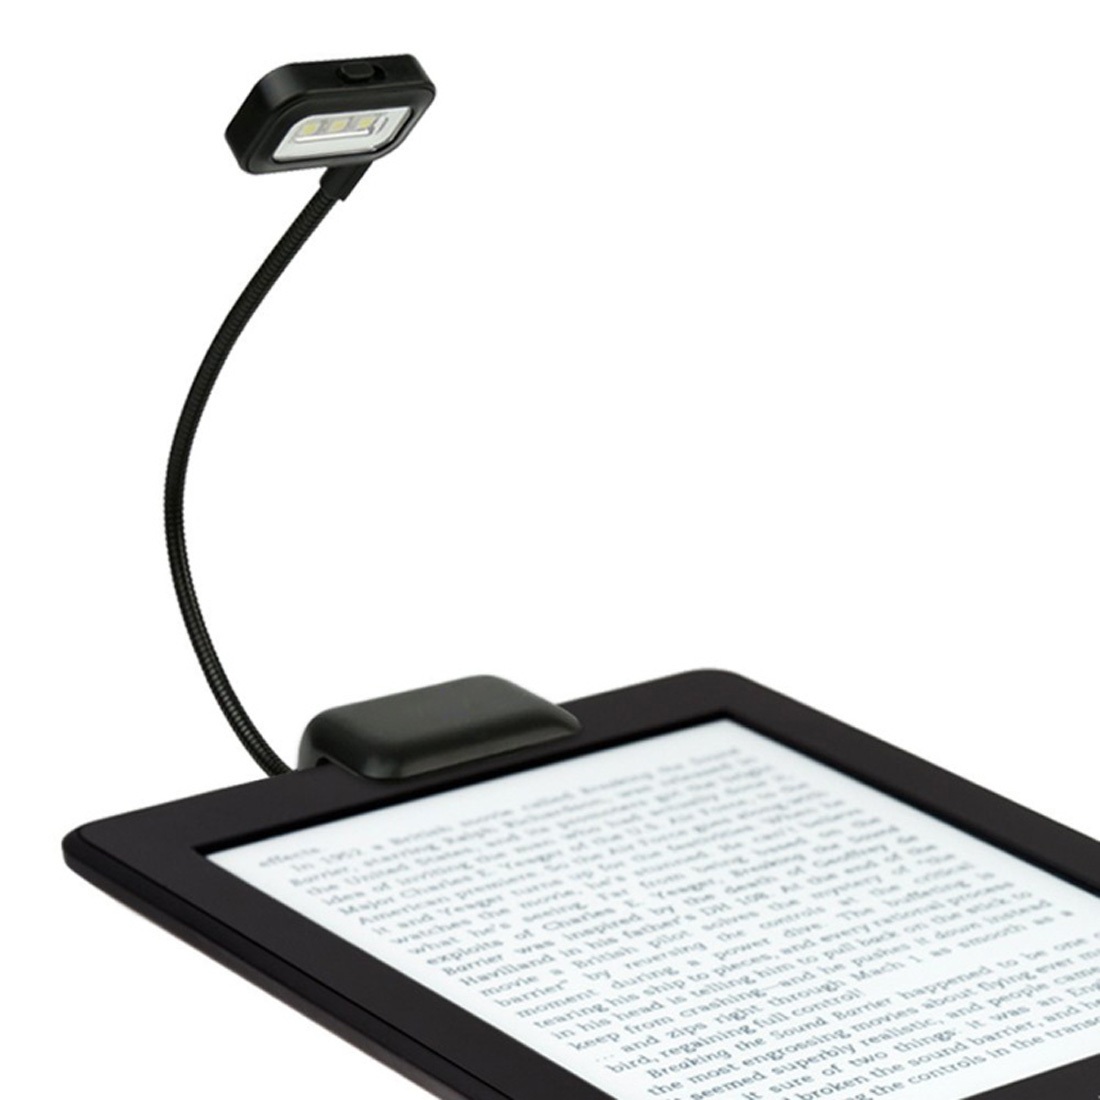 

0.5W Portable Lamp Flexible Mini Clip On Reading Light Reading Lamp for Amazon Kindle/eBook Readers/ PDAs